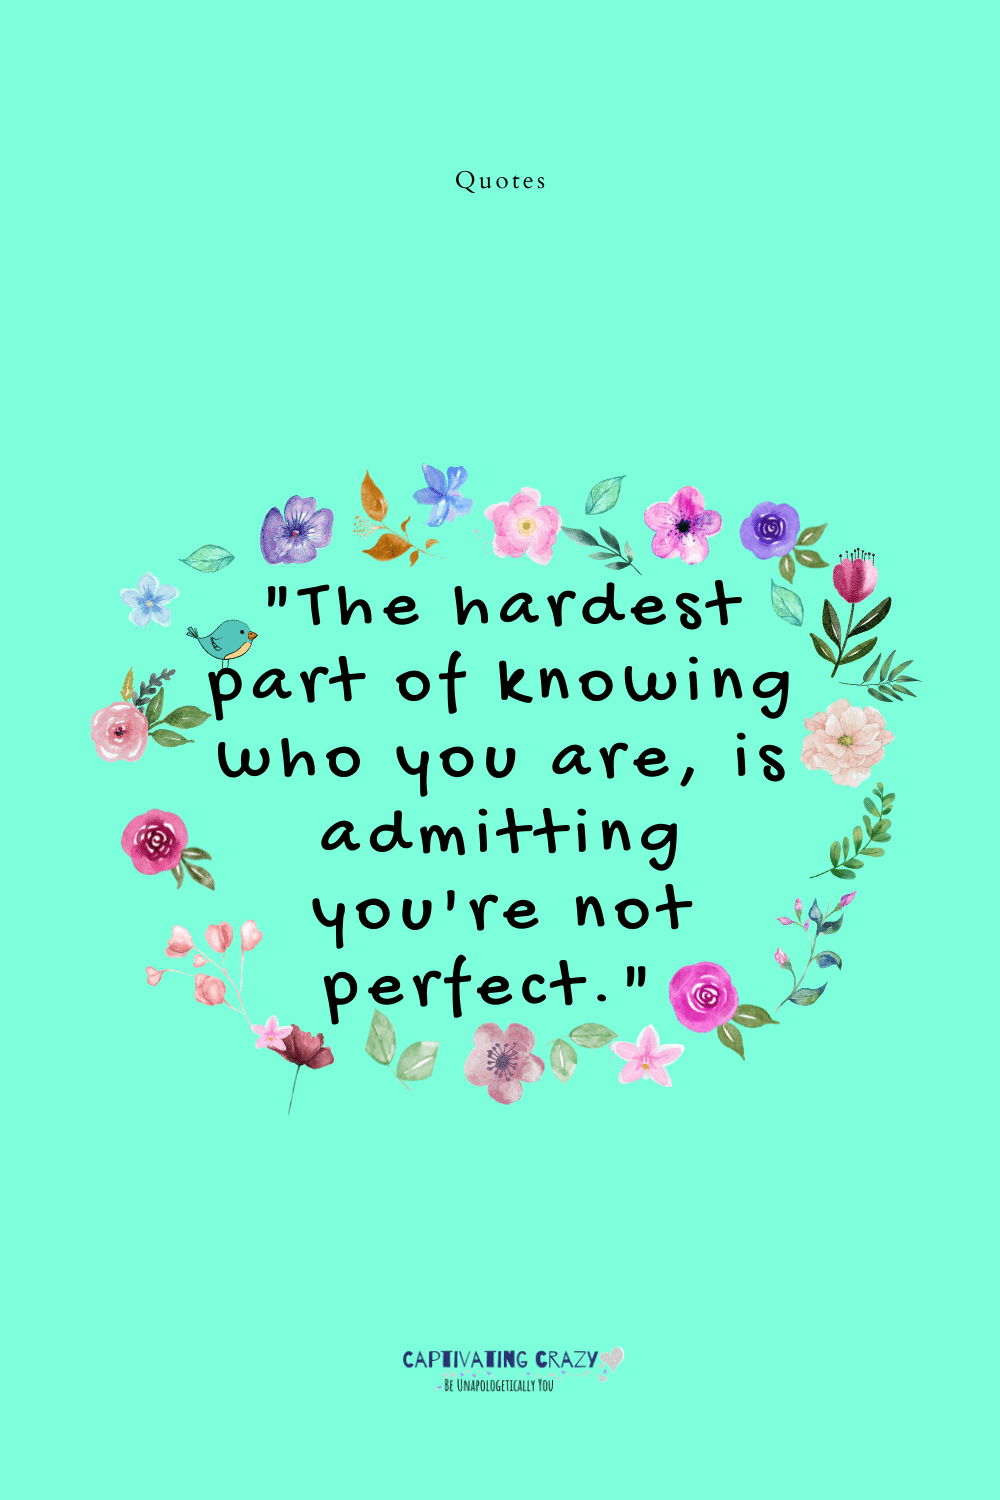 "The hardest part of knowing who you are, is admitting you're not perfect." - Unknown